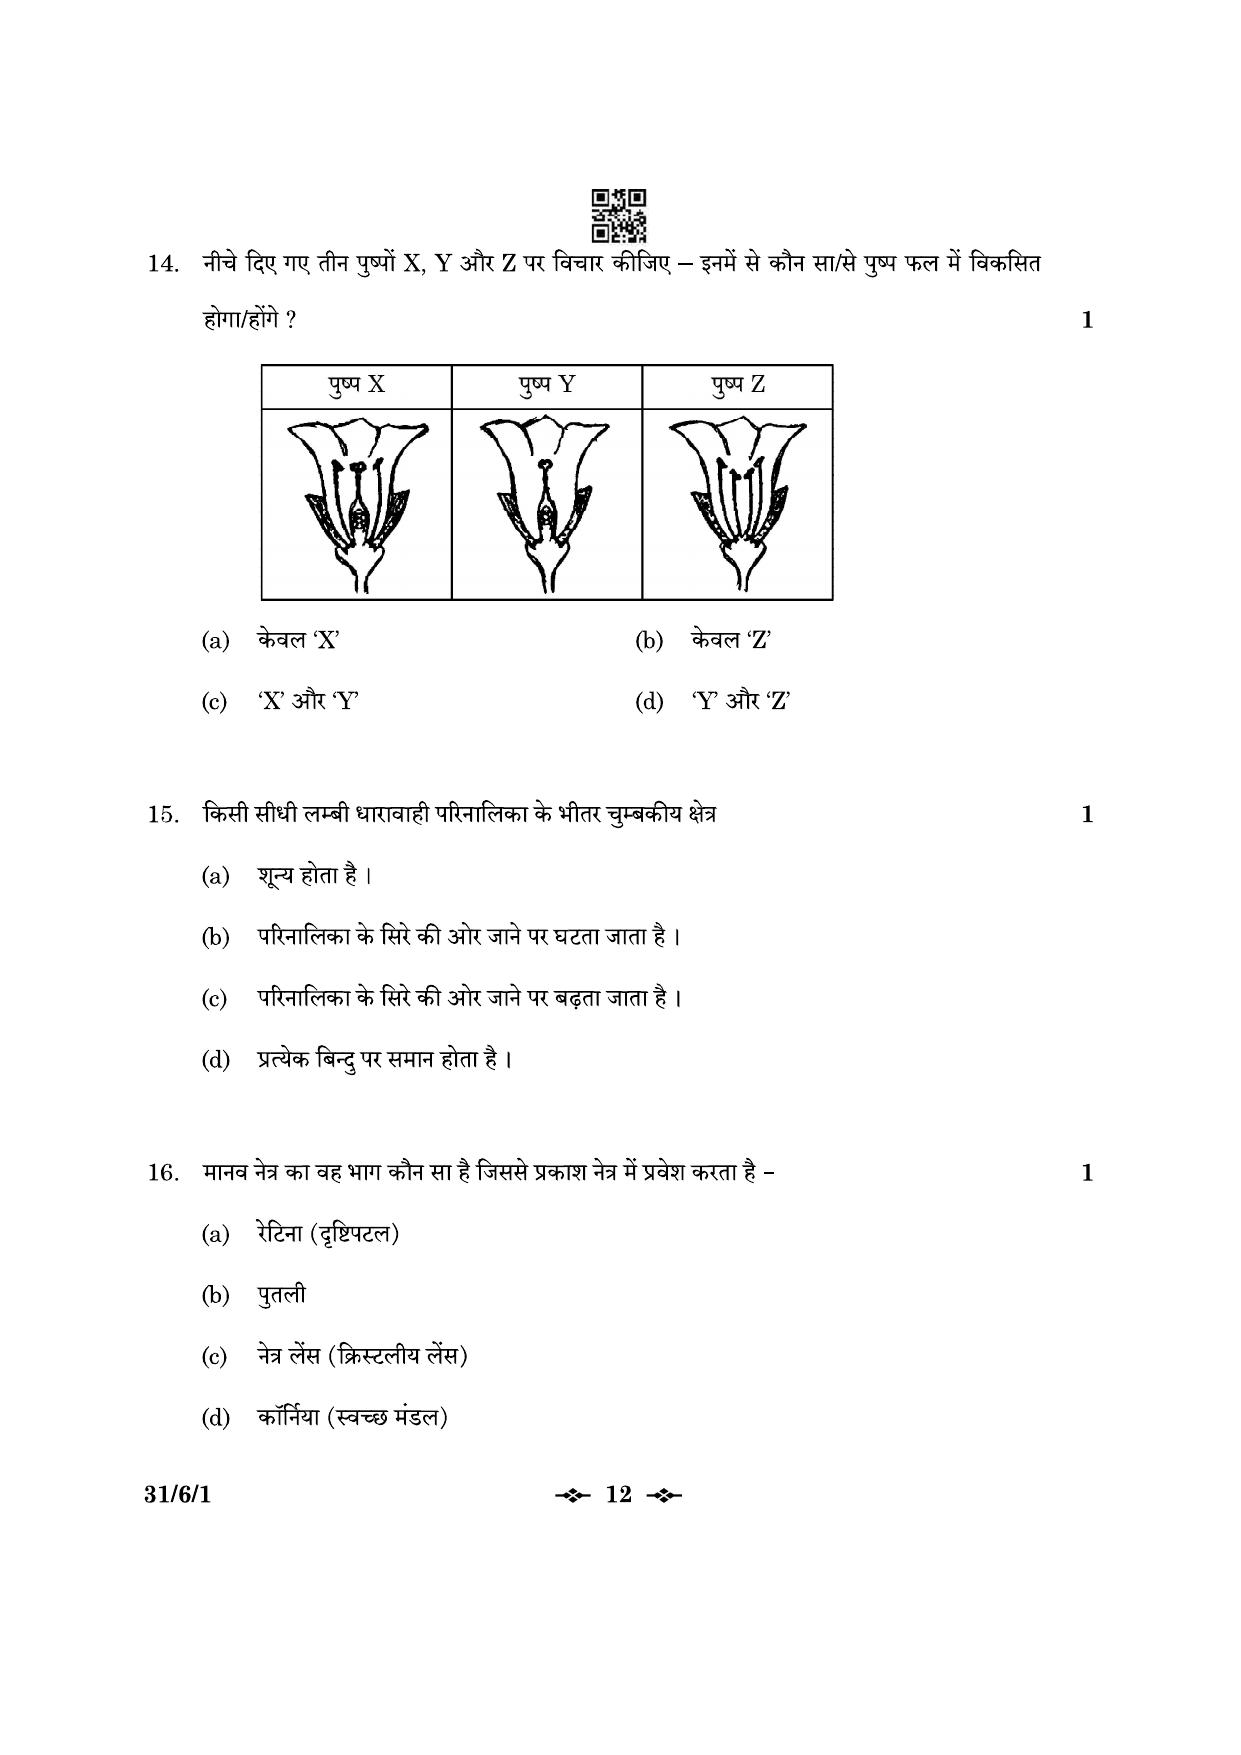 CBSE Class 10 31-6-1 Science 2023 Question Paper - Page 12